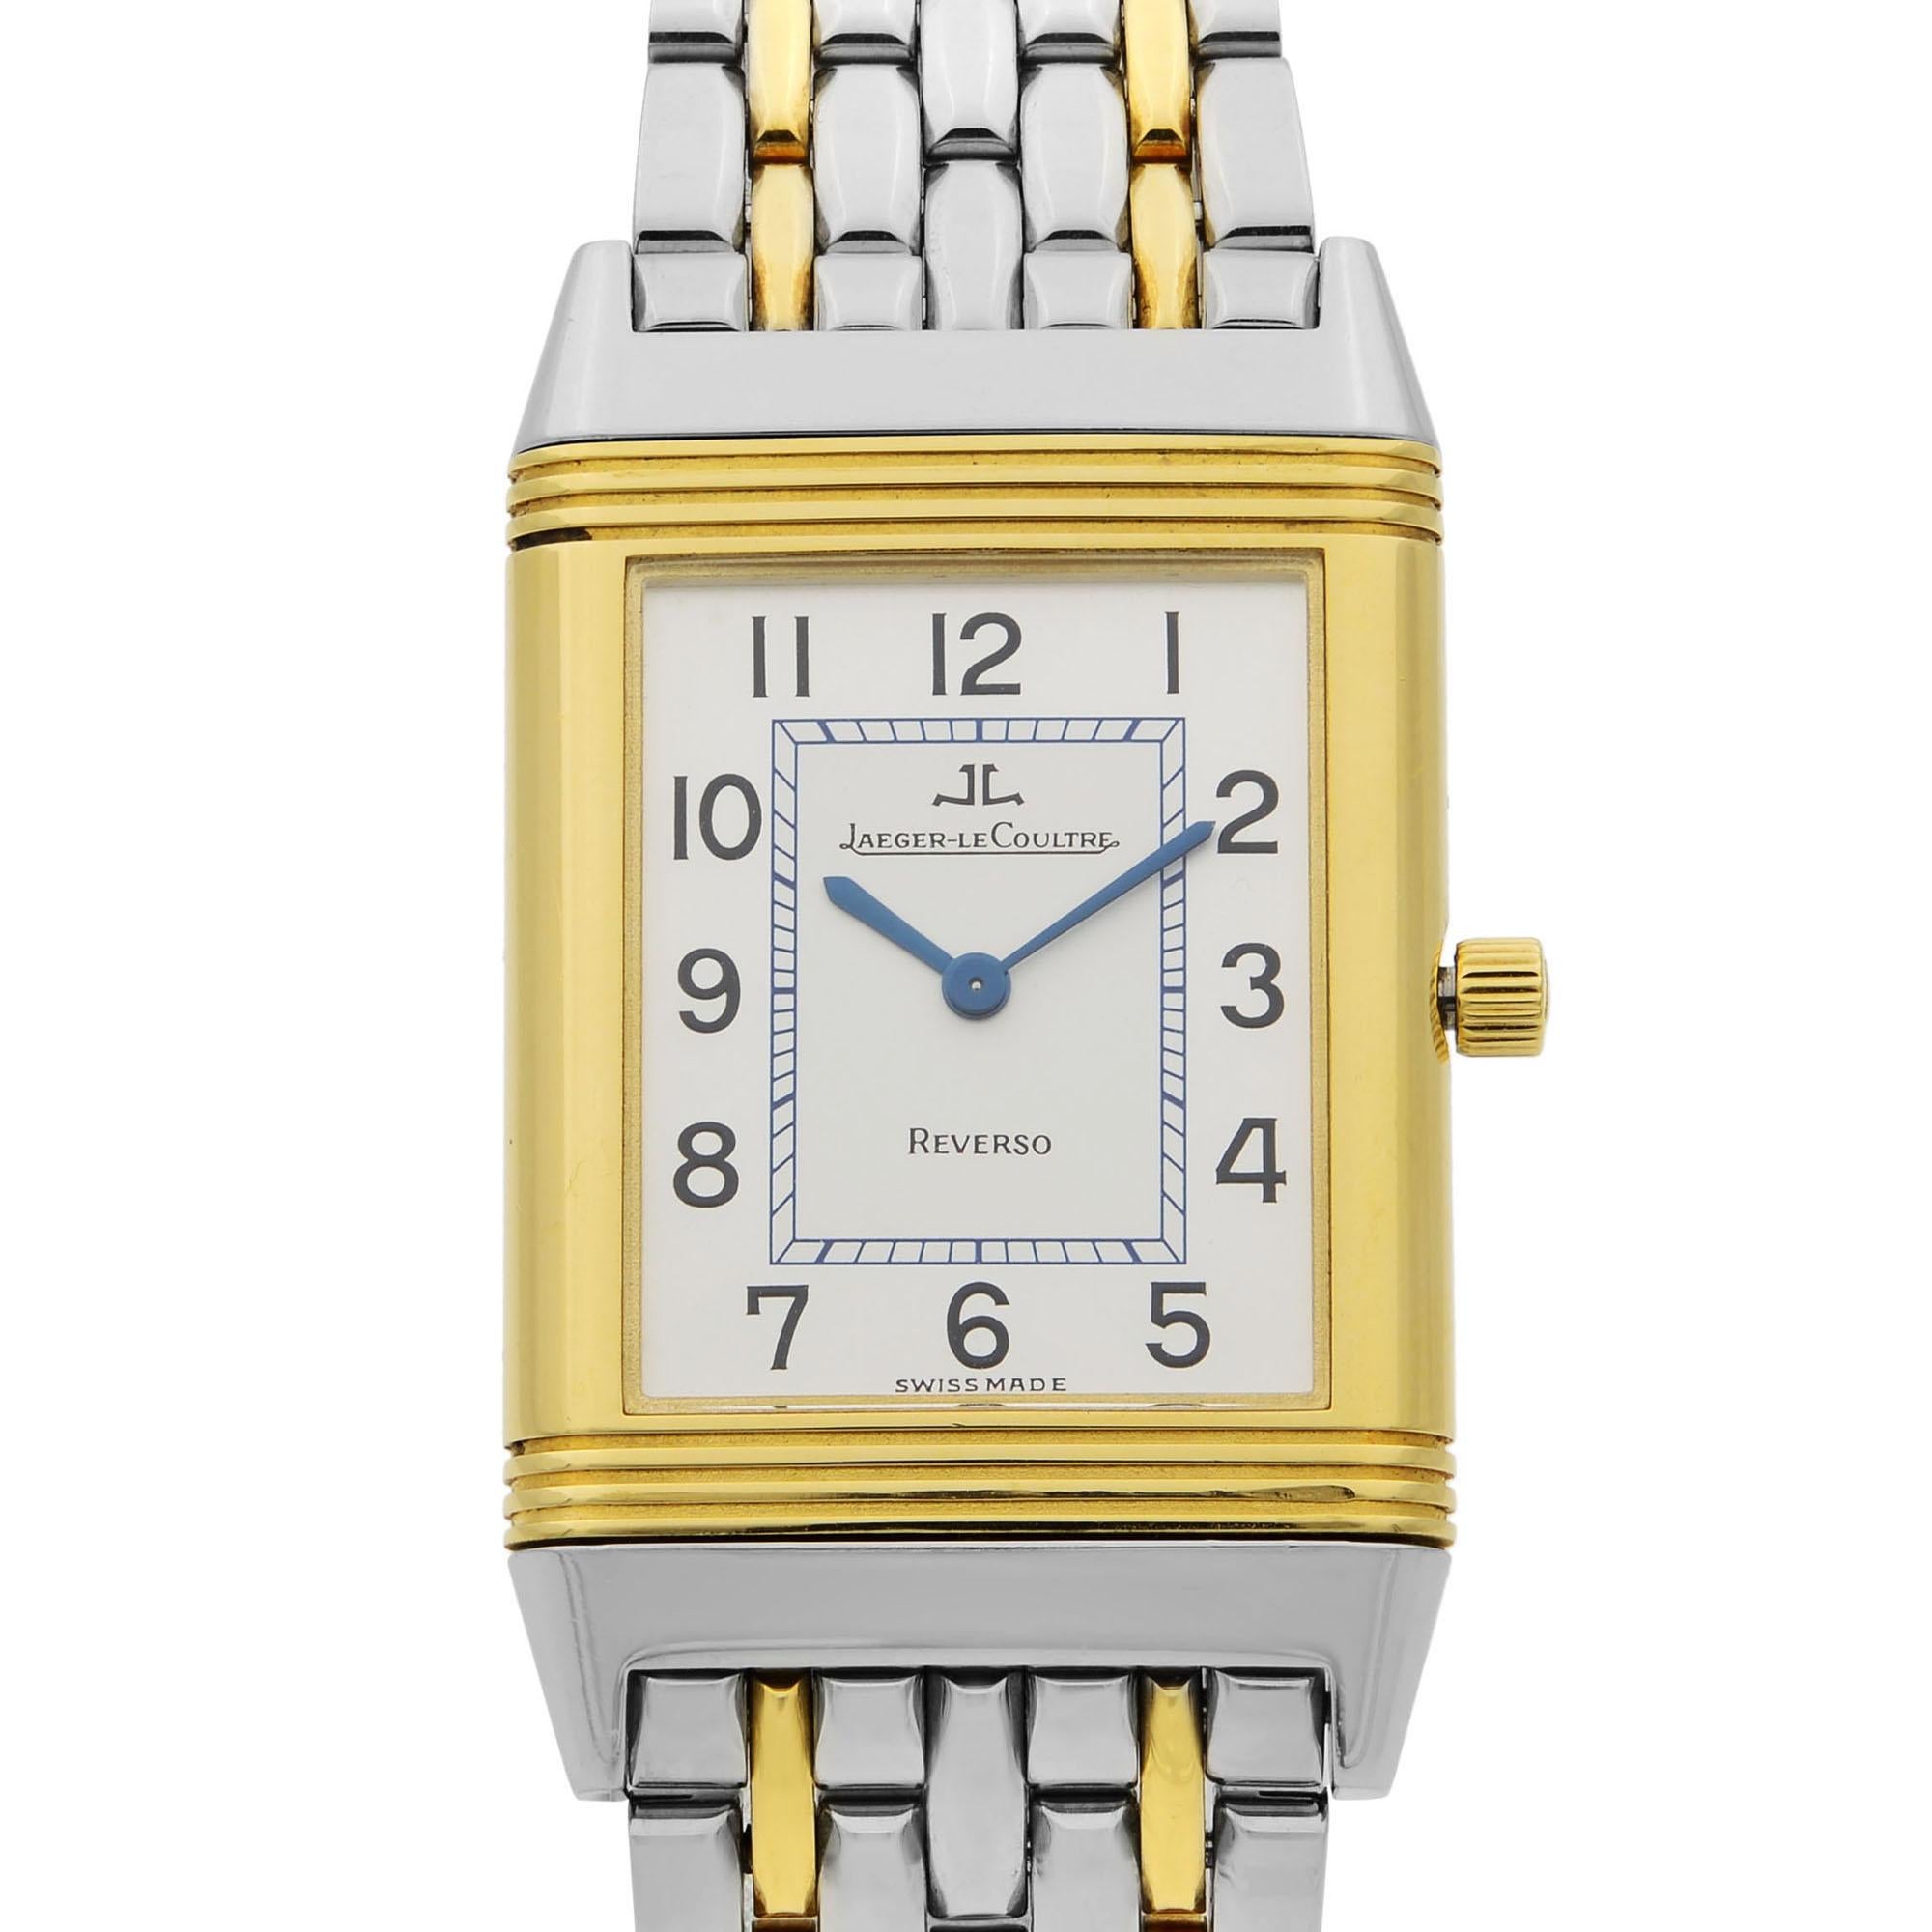 This pre-owned Jaeger-LeCoultre Reverso  250.5.08 is a beautiful men's timepiece that is powered by quartz (battery) movement which is cased in a stainless & solid gold case. It has a  rectangle shape face, no features dial and has hand arabic